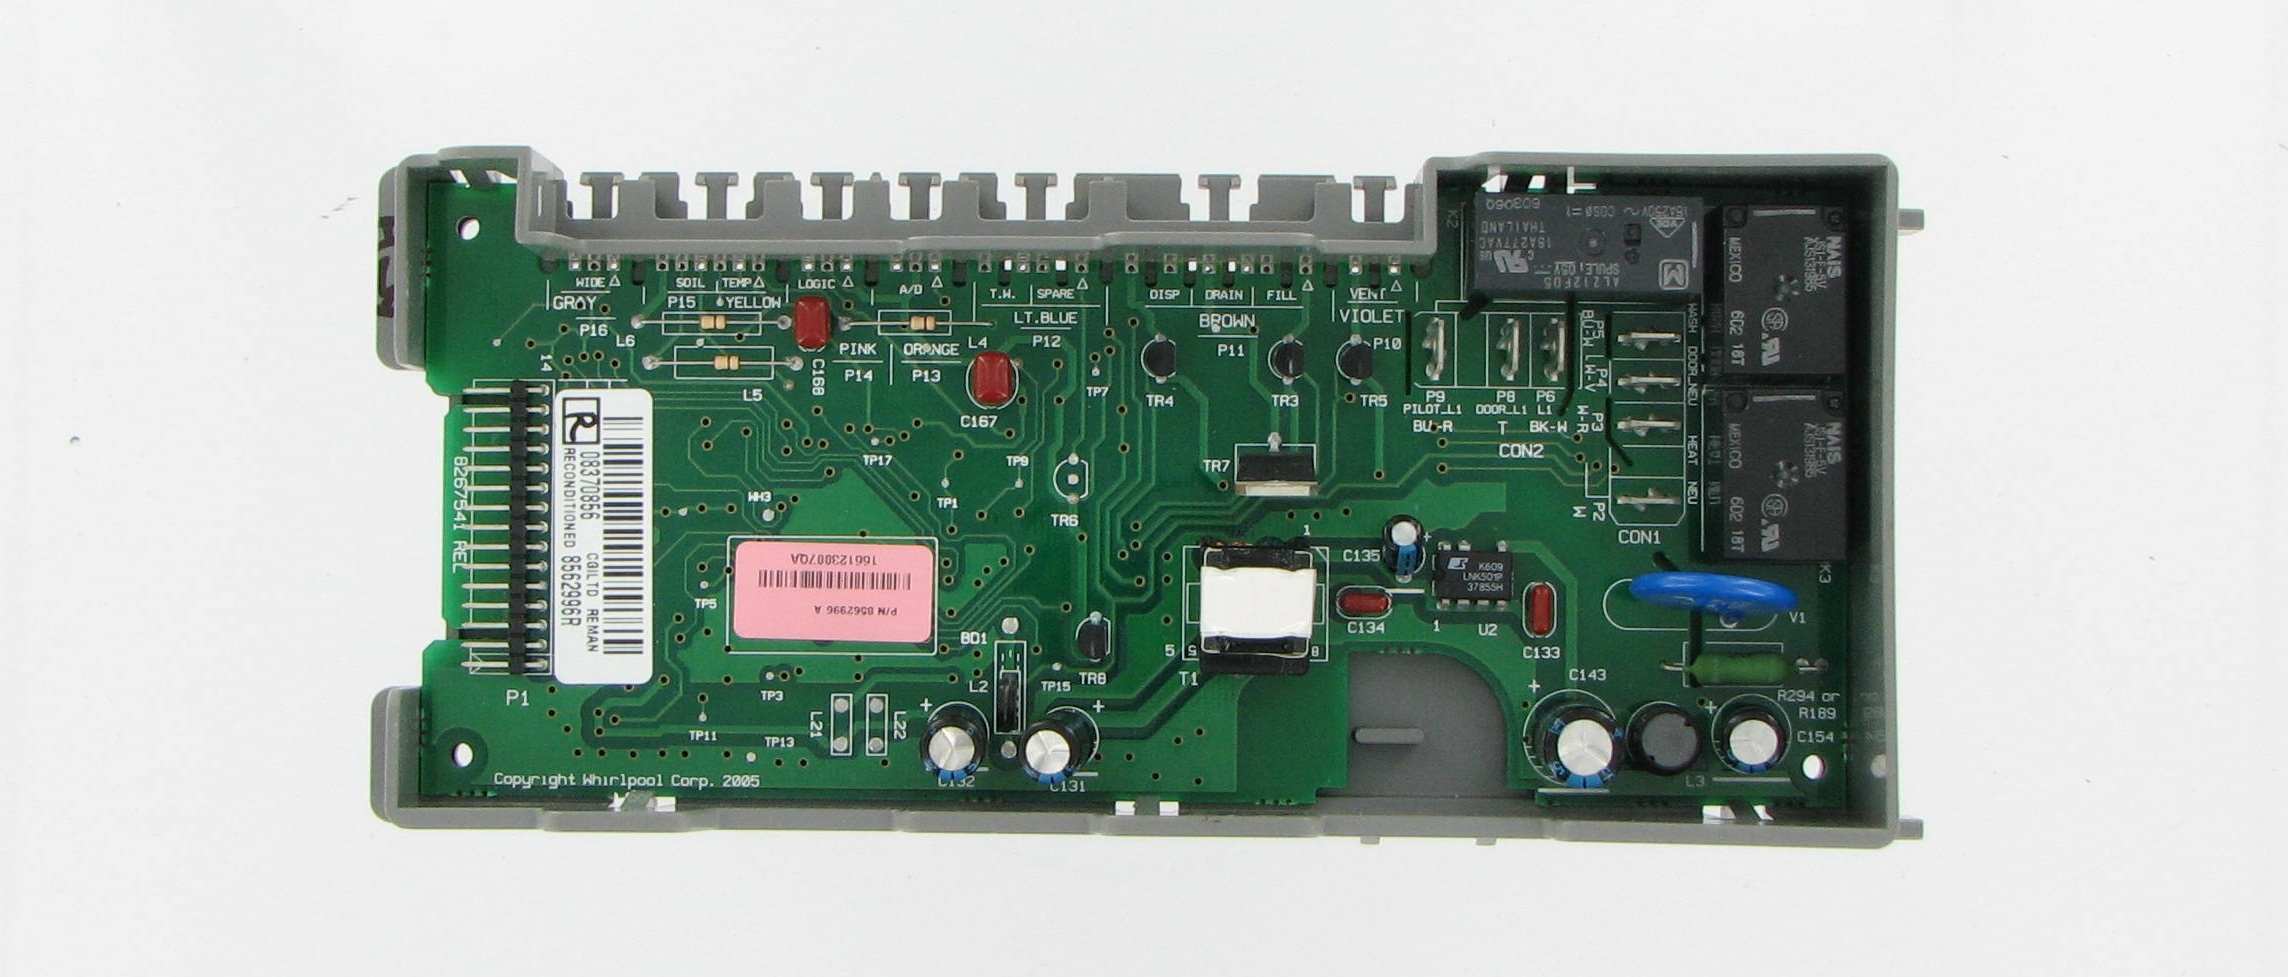 Details about   Kenmore Dishwasher Control Board Part# W10084141 B 